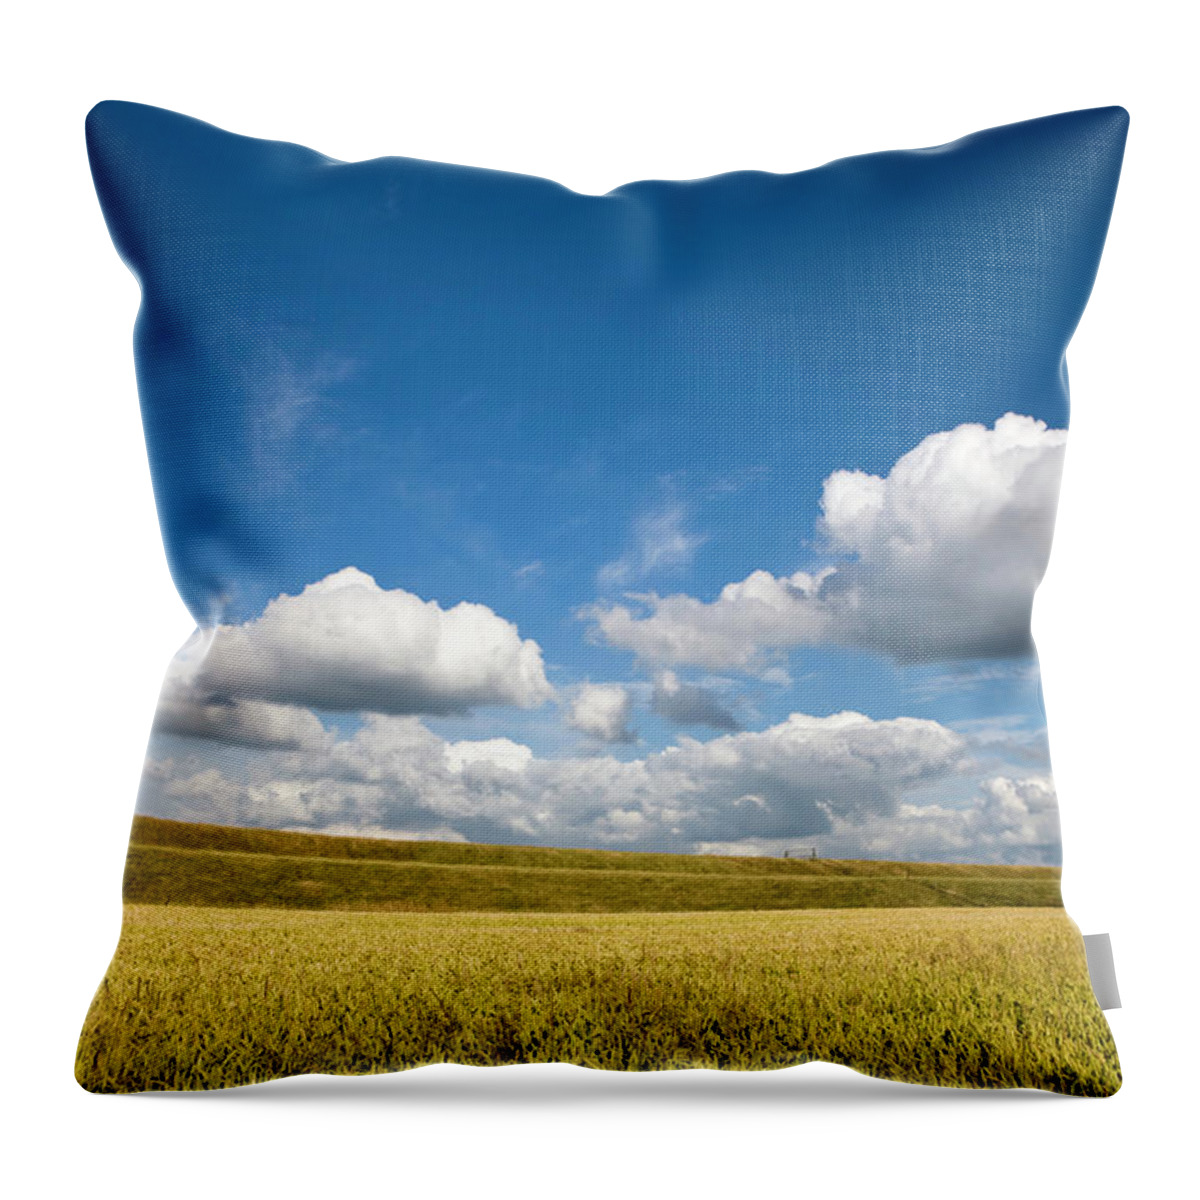 Scenics Throw Pillow featuring the photograph Dutch Views by Digiclicks